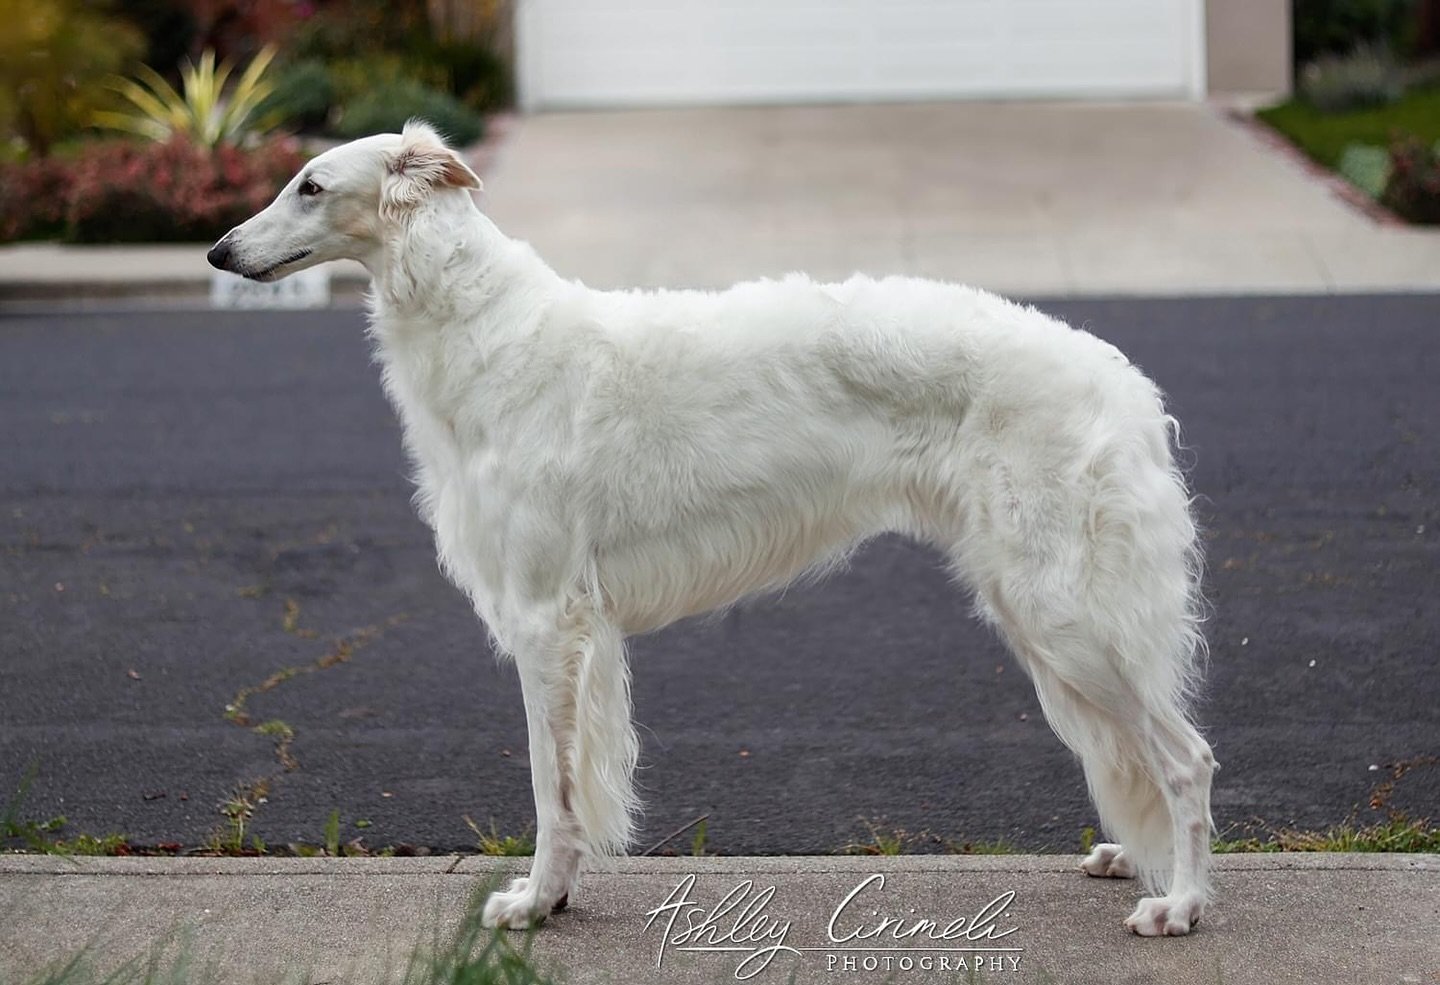 Zsa Zsa looking so grown up! She&rsquo;s visiting for the weekend so I can get her QC for lure coursing, which will allow me to run her at the borzoi national specialty. I&rsquo;m confident she&rsquo;ll qualify but fingers crossed none the less 😁

I